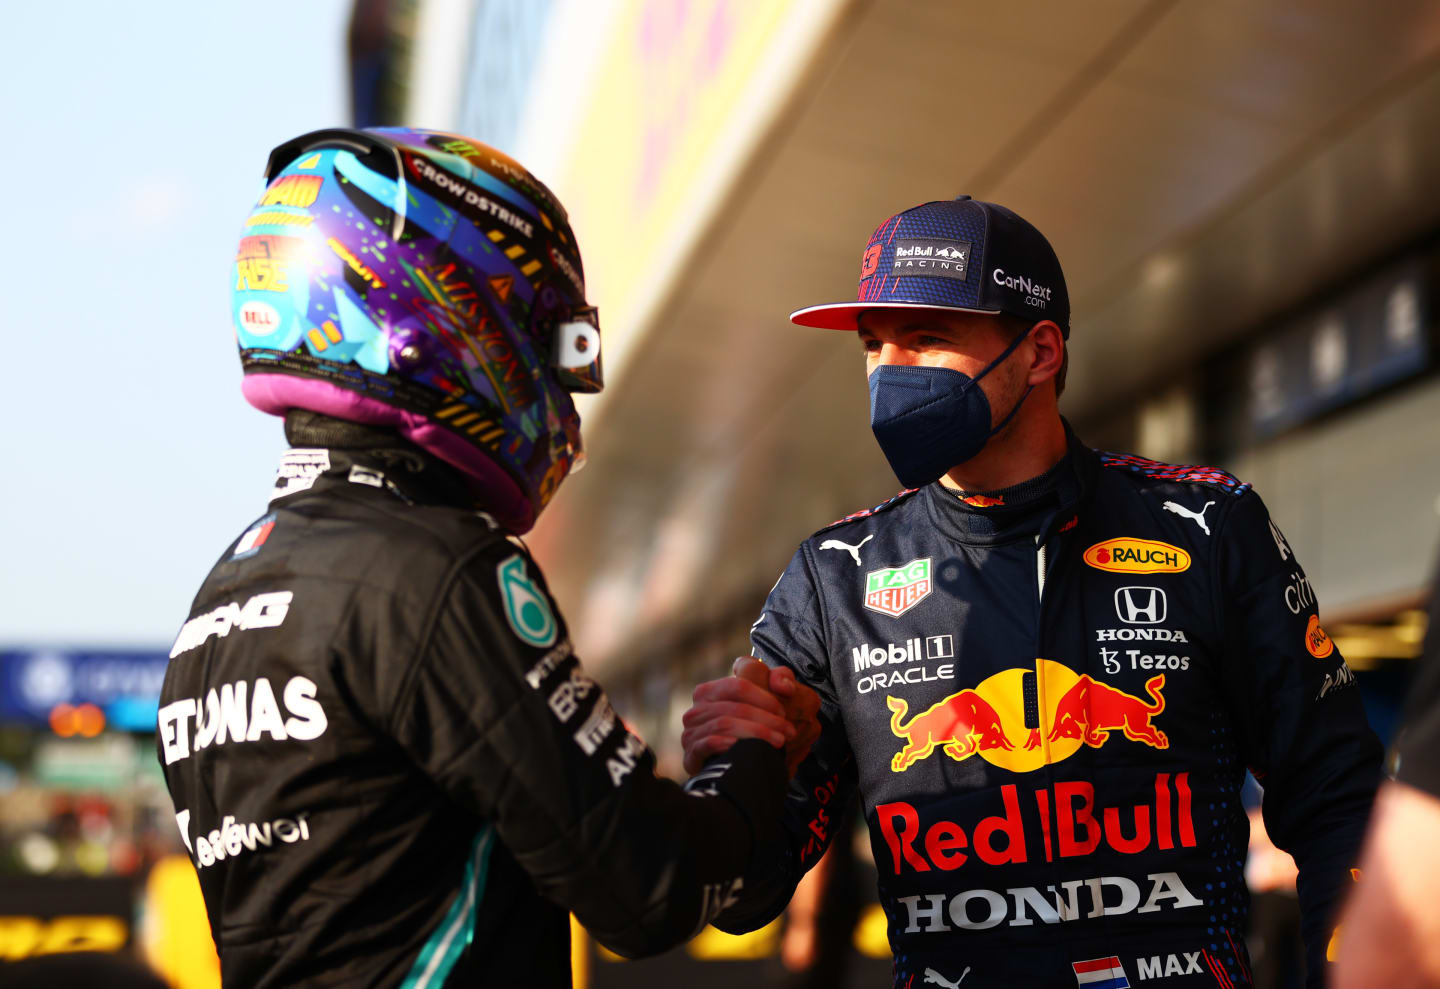 NORTHAMPTON, ENGLAND - JULY 16: Fastest qualifier Lewis Hamilton of Great Britain and Mercedes GP and second fastest qualifier Max Verstappen of Netherlands and Red Bull Racing shake hands in parc ferme during qualifying ahead of the F1 Grand Prix of Great Britain at Silverstone on July 16, 2021 in Northampton, England. (Photo by Dan Istitene - Formula 1/Formula 1 via Getty Images)